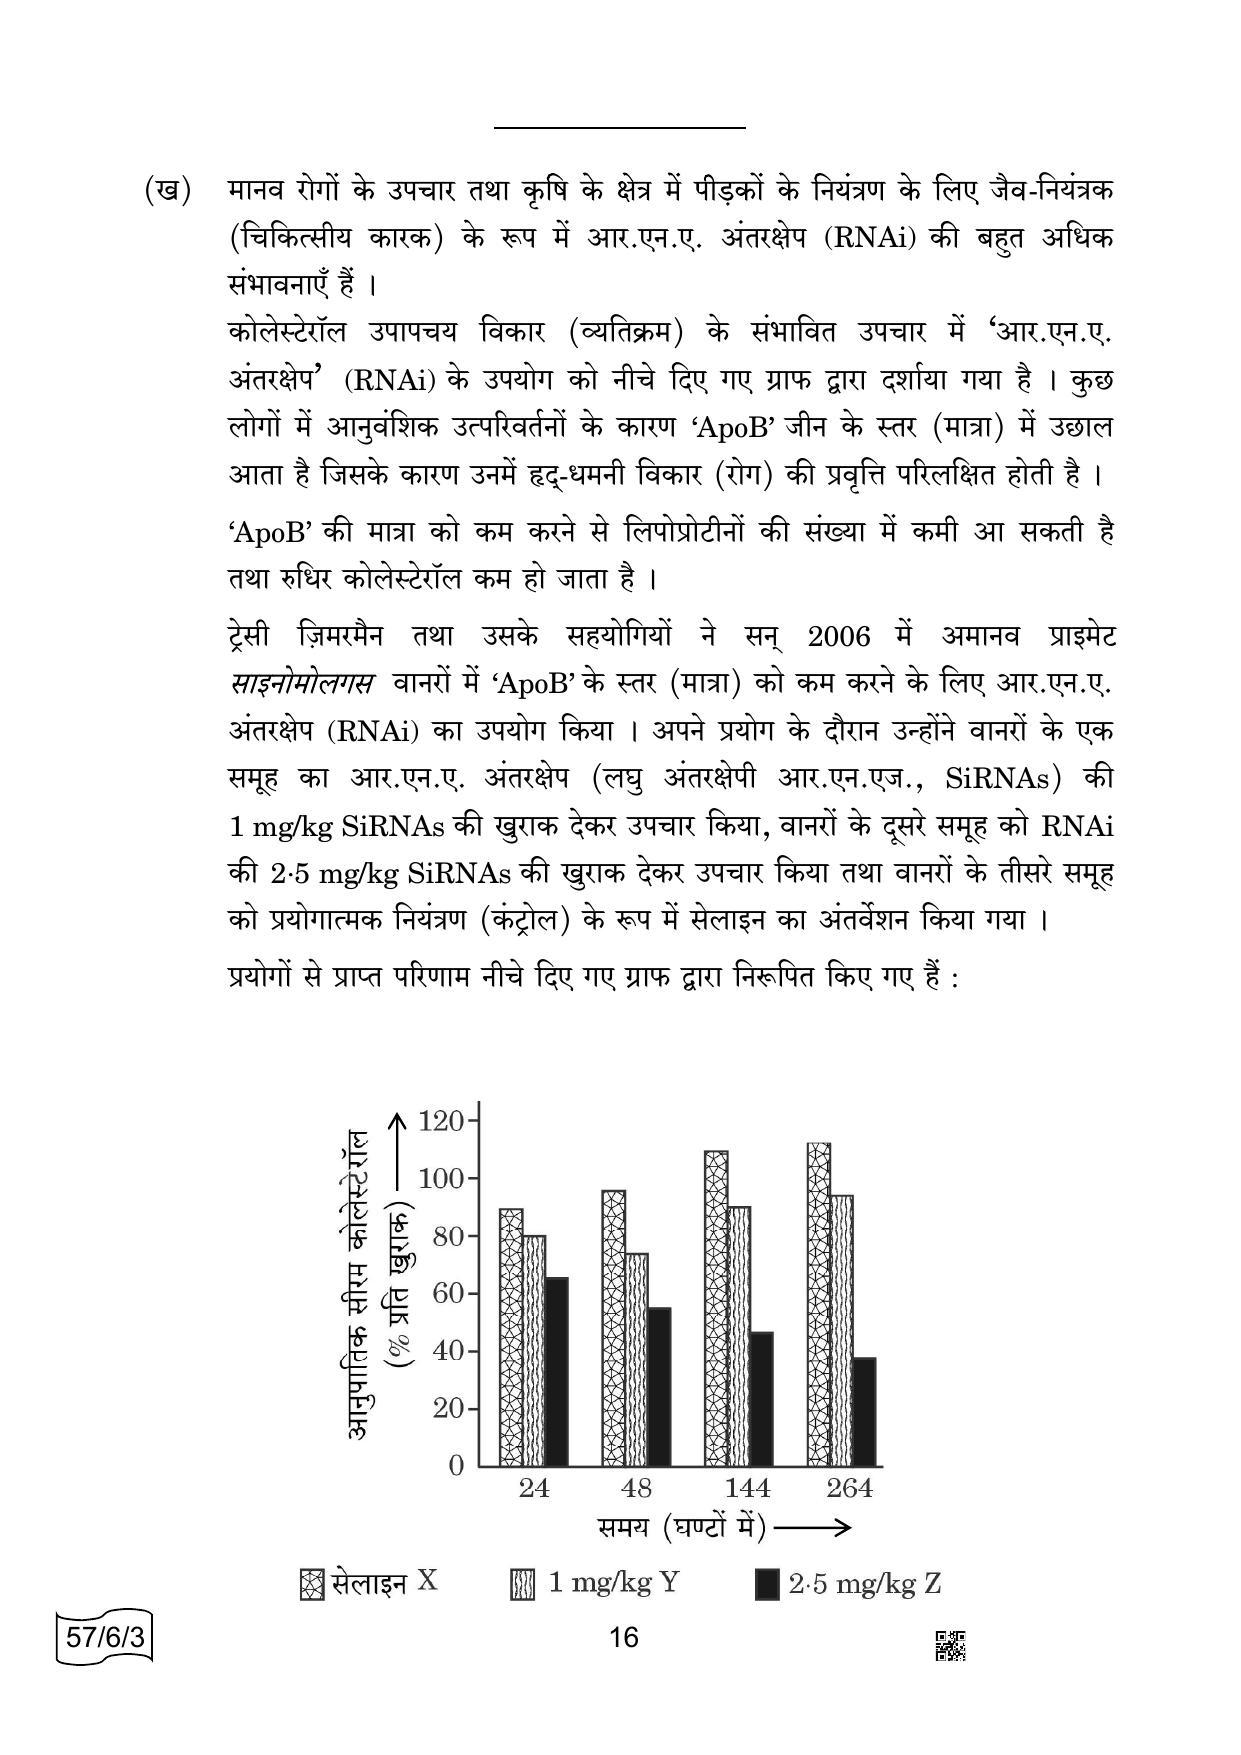 CBSE Class 12 57-6-3 BIOLOGY 2022 Compartment Question Paper - Page 16